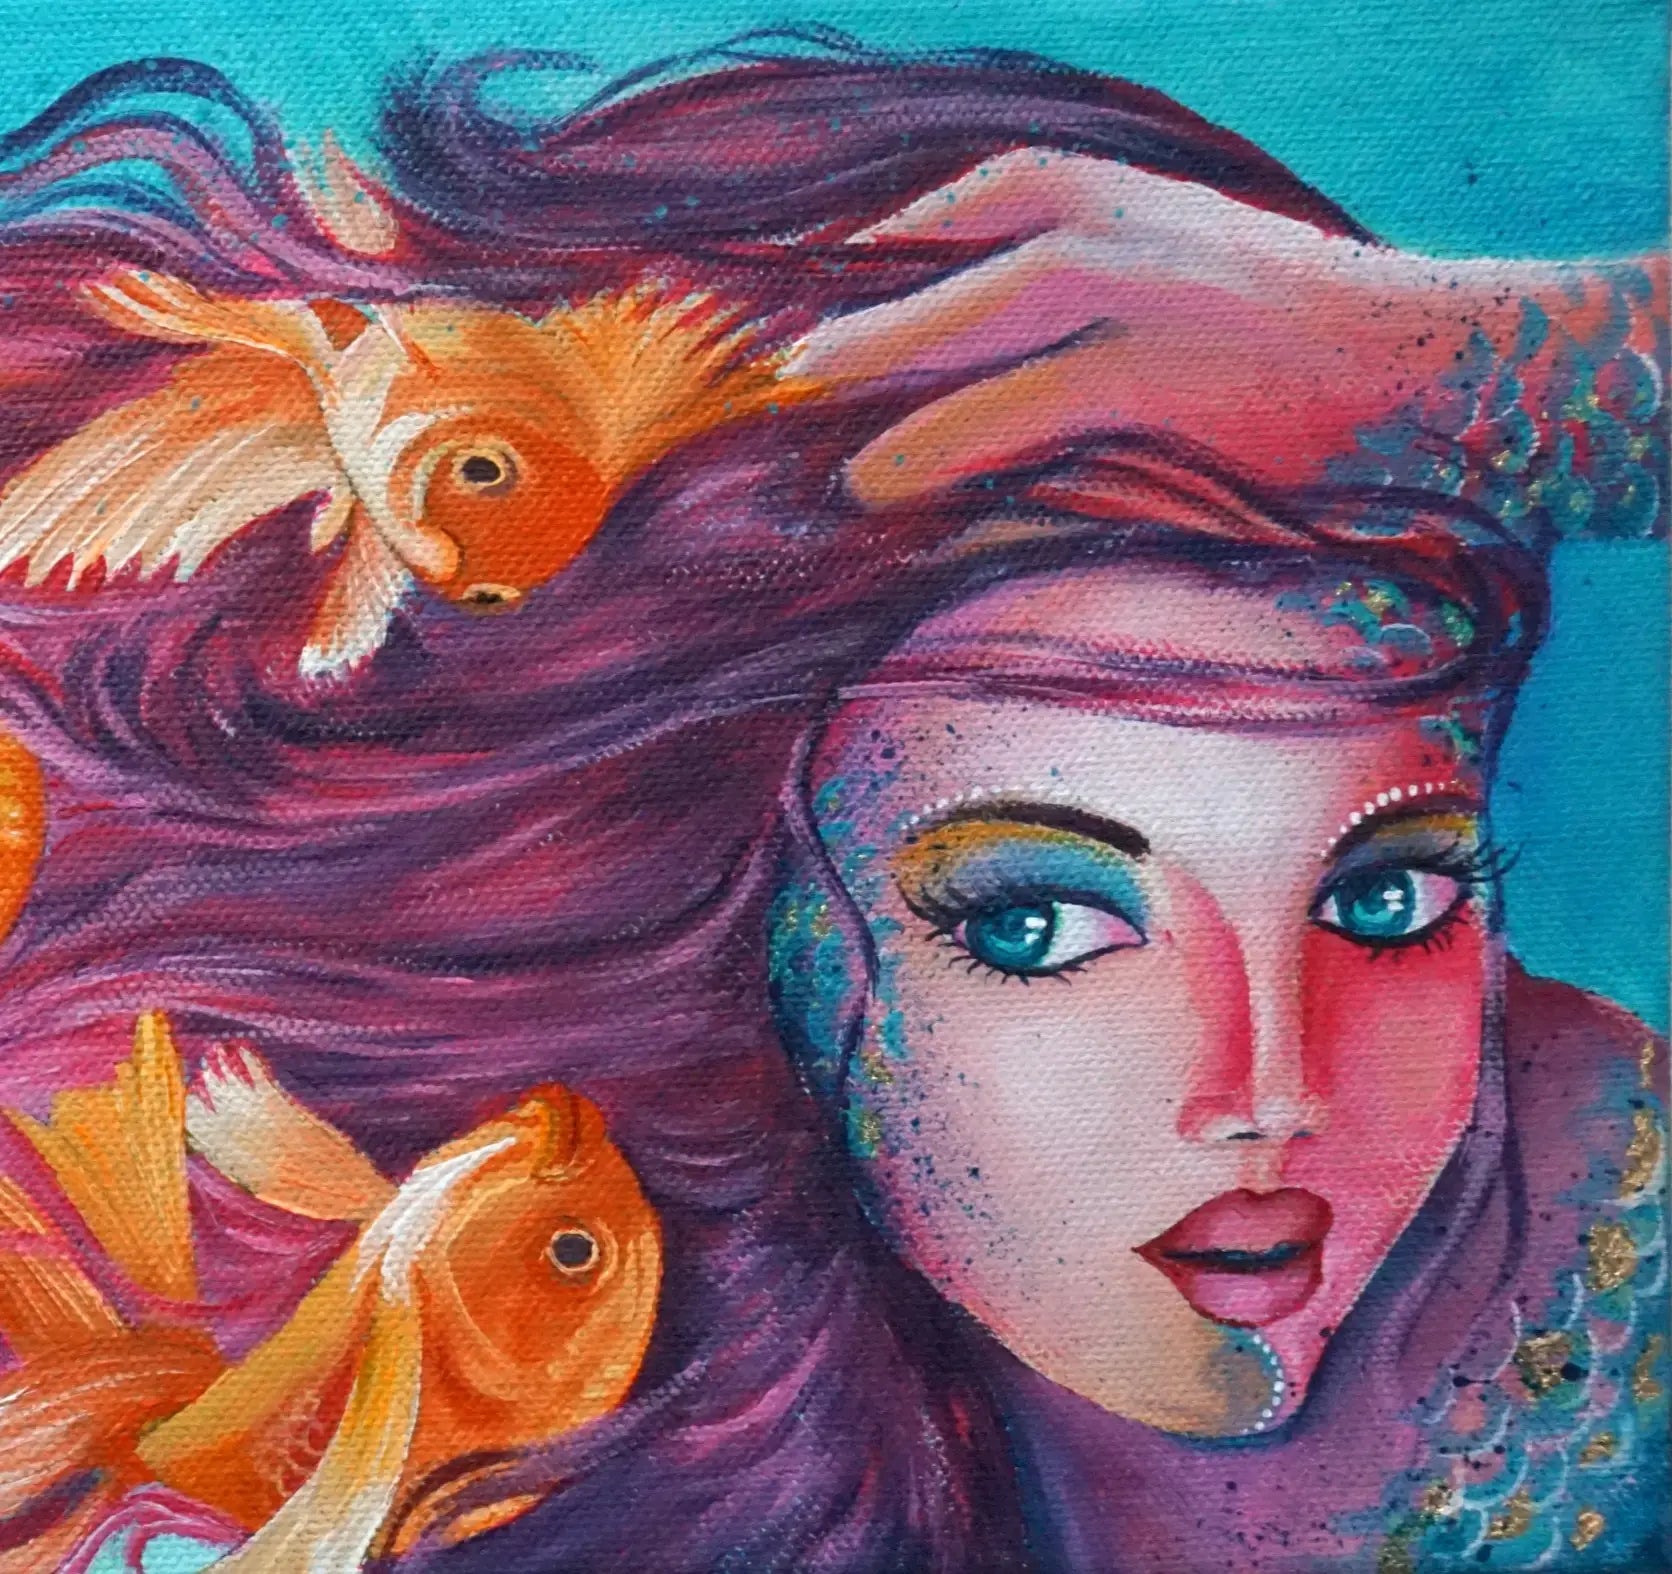 Enchanting Underwater World: Learn to Paint a Mermaid with Acrylics on Canvas in This Workshop